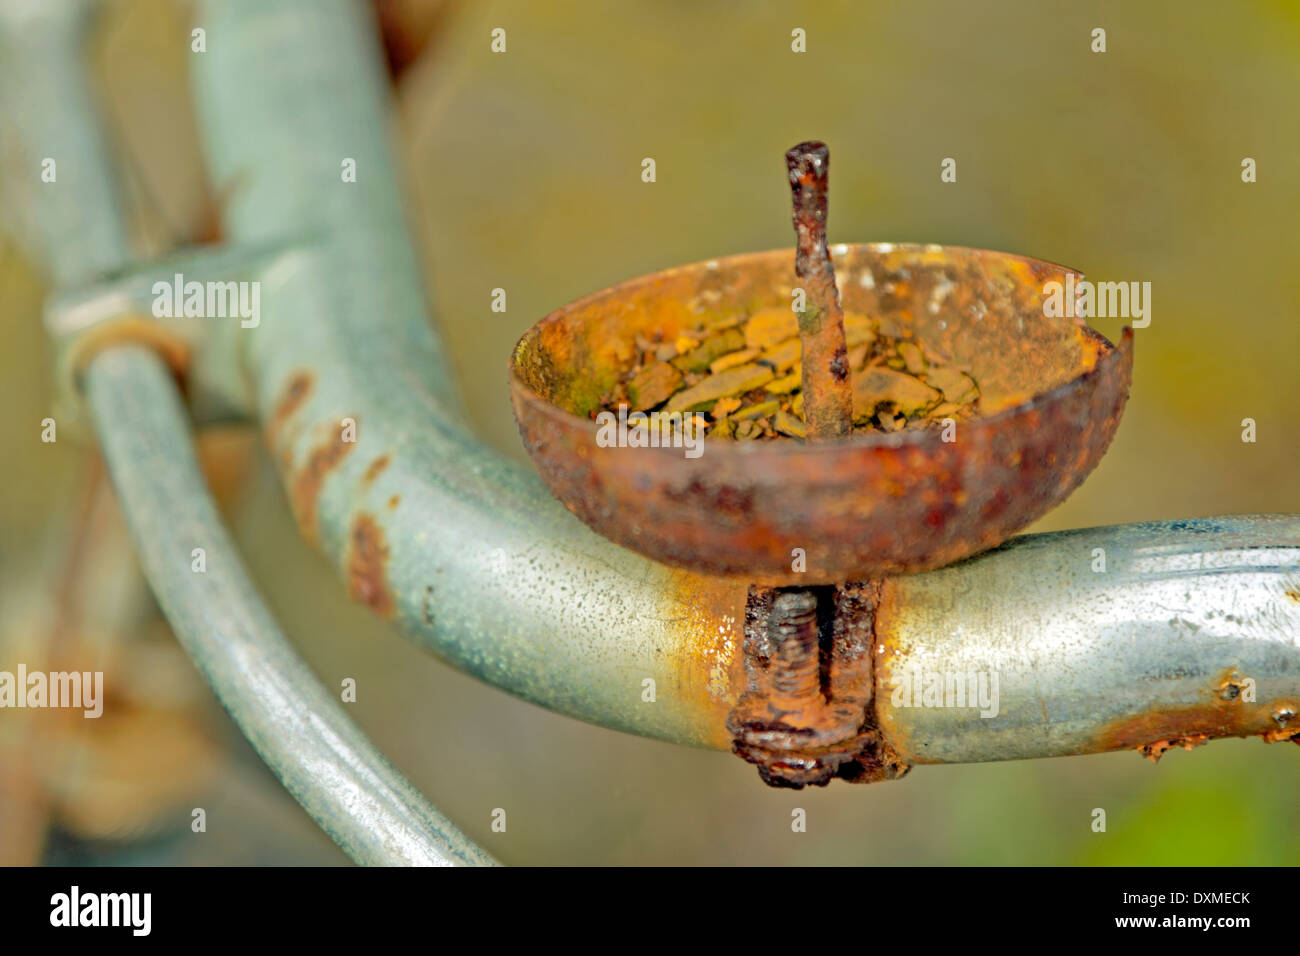 Rusty bicycle bell on unfocused background. Stock Photo